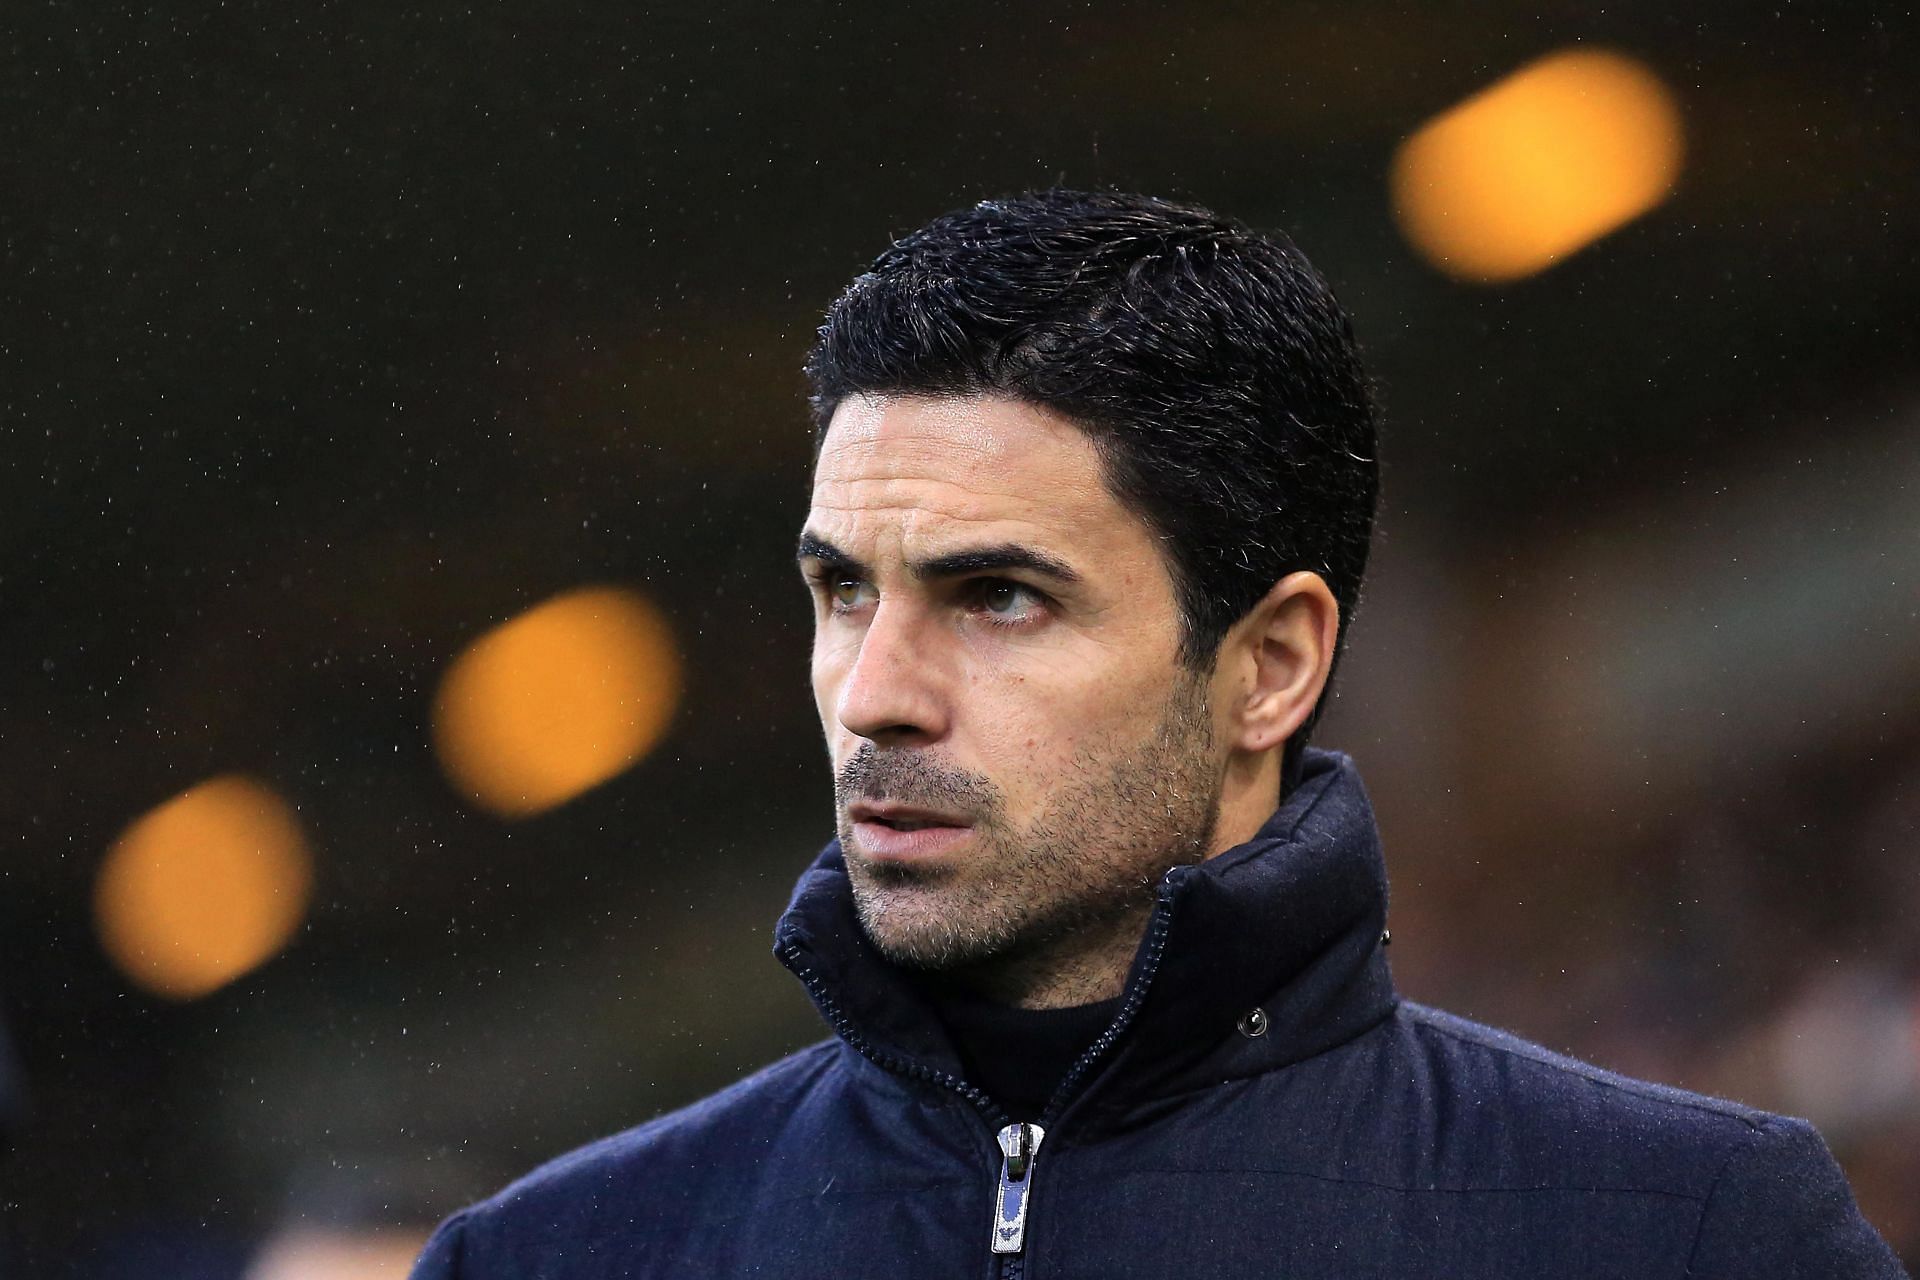 Arsenal manager Mikel Arteta is working to secure a top-four finish this season.